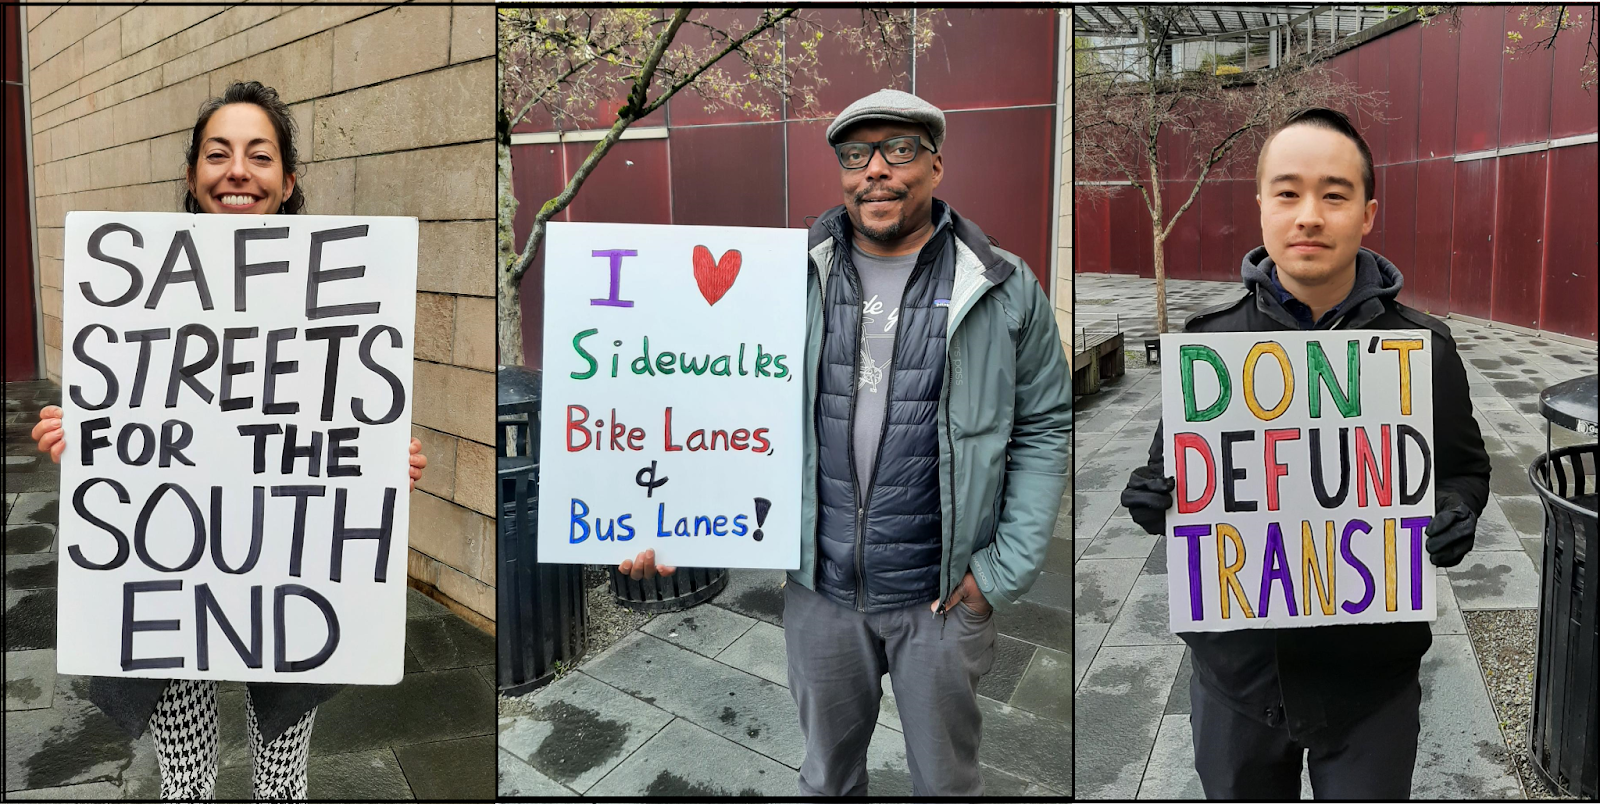 Three images of people holding signs that read “Safe Streets for the South End”, “I <3 sidewalks, bike lanes, & bus lanes!” and “Don’t Defund Transit.”